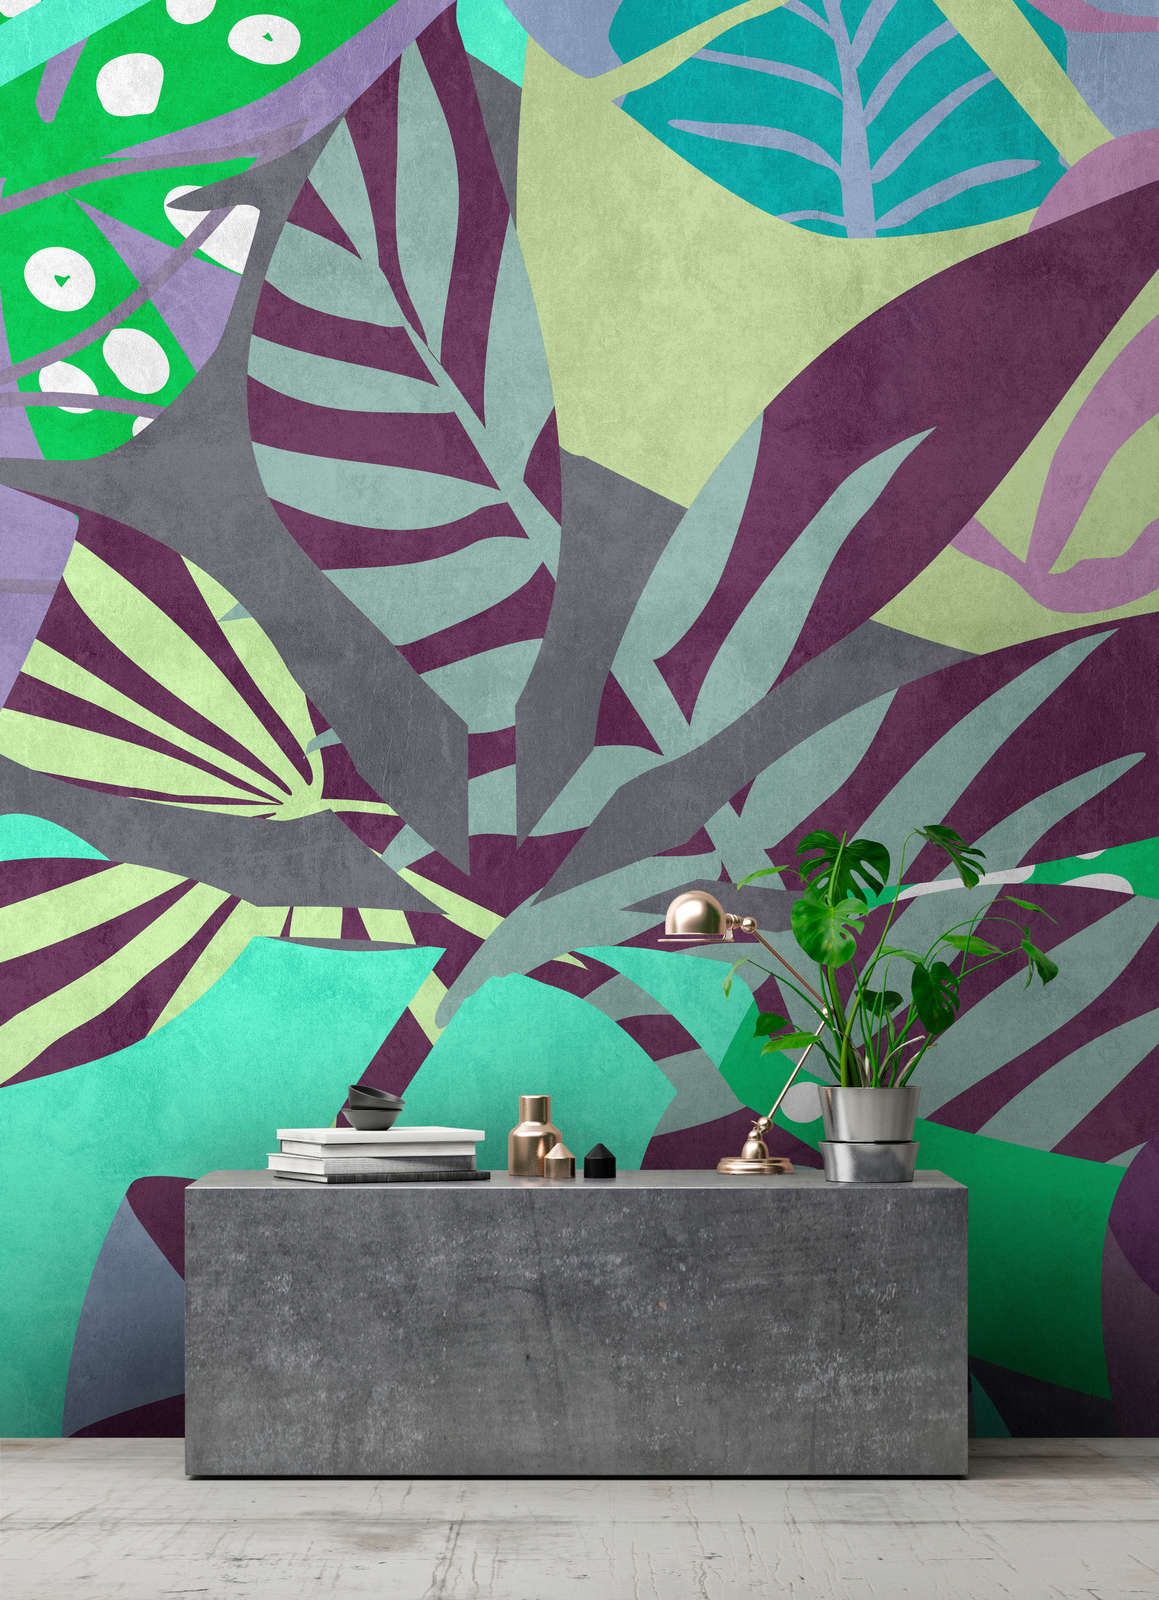             Photo wallpaper »anais 2« - Abstract leaves on concrete plaster texture - Purple, Green | Light textured non-woven
        